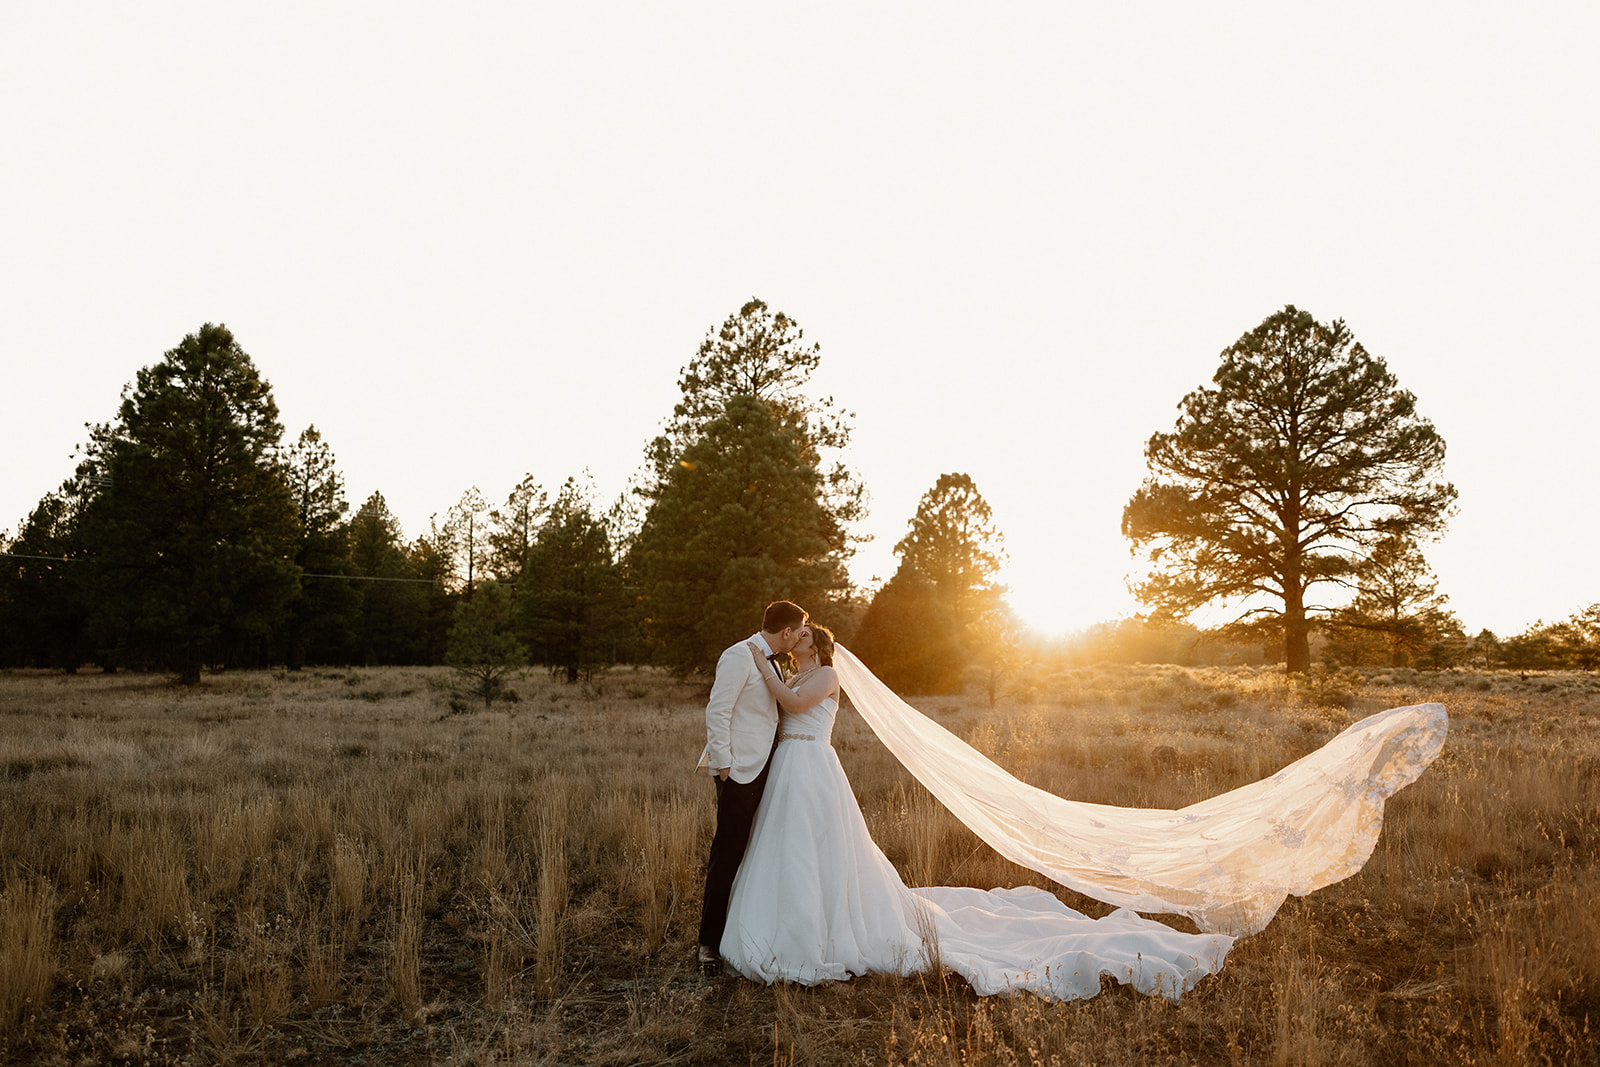 Stunning bride and groom dance together in the Arizona wilderness